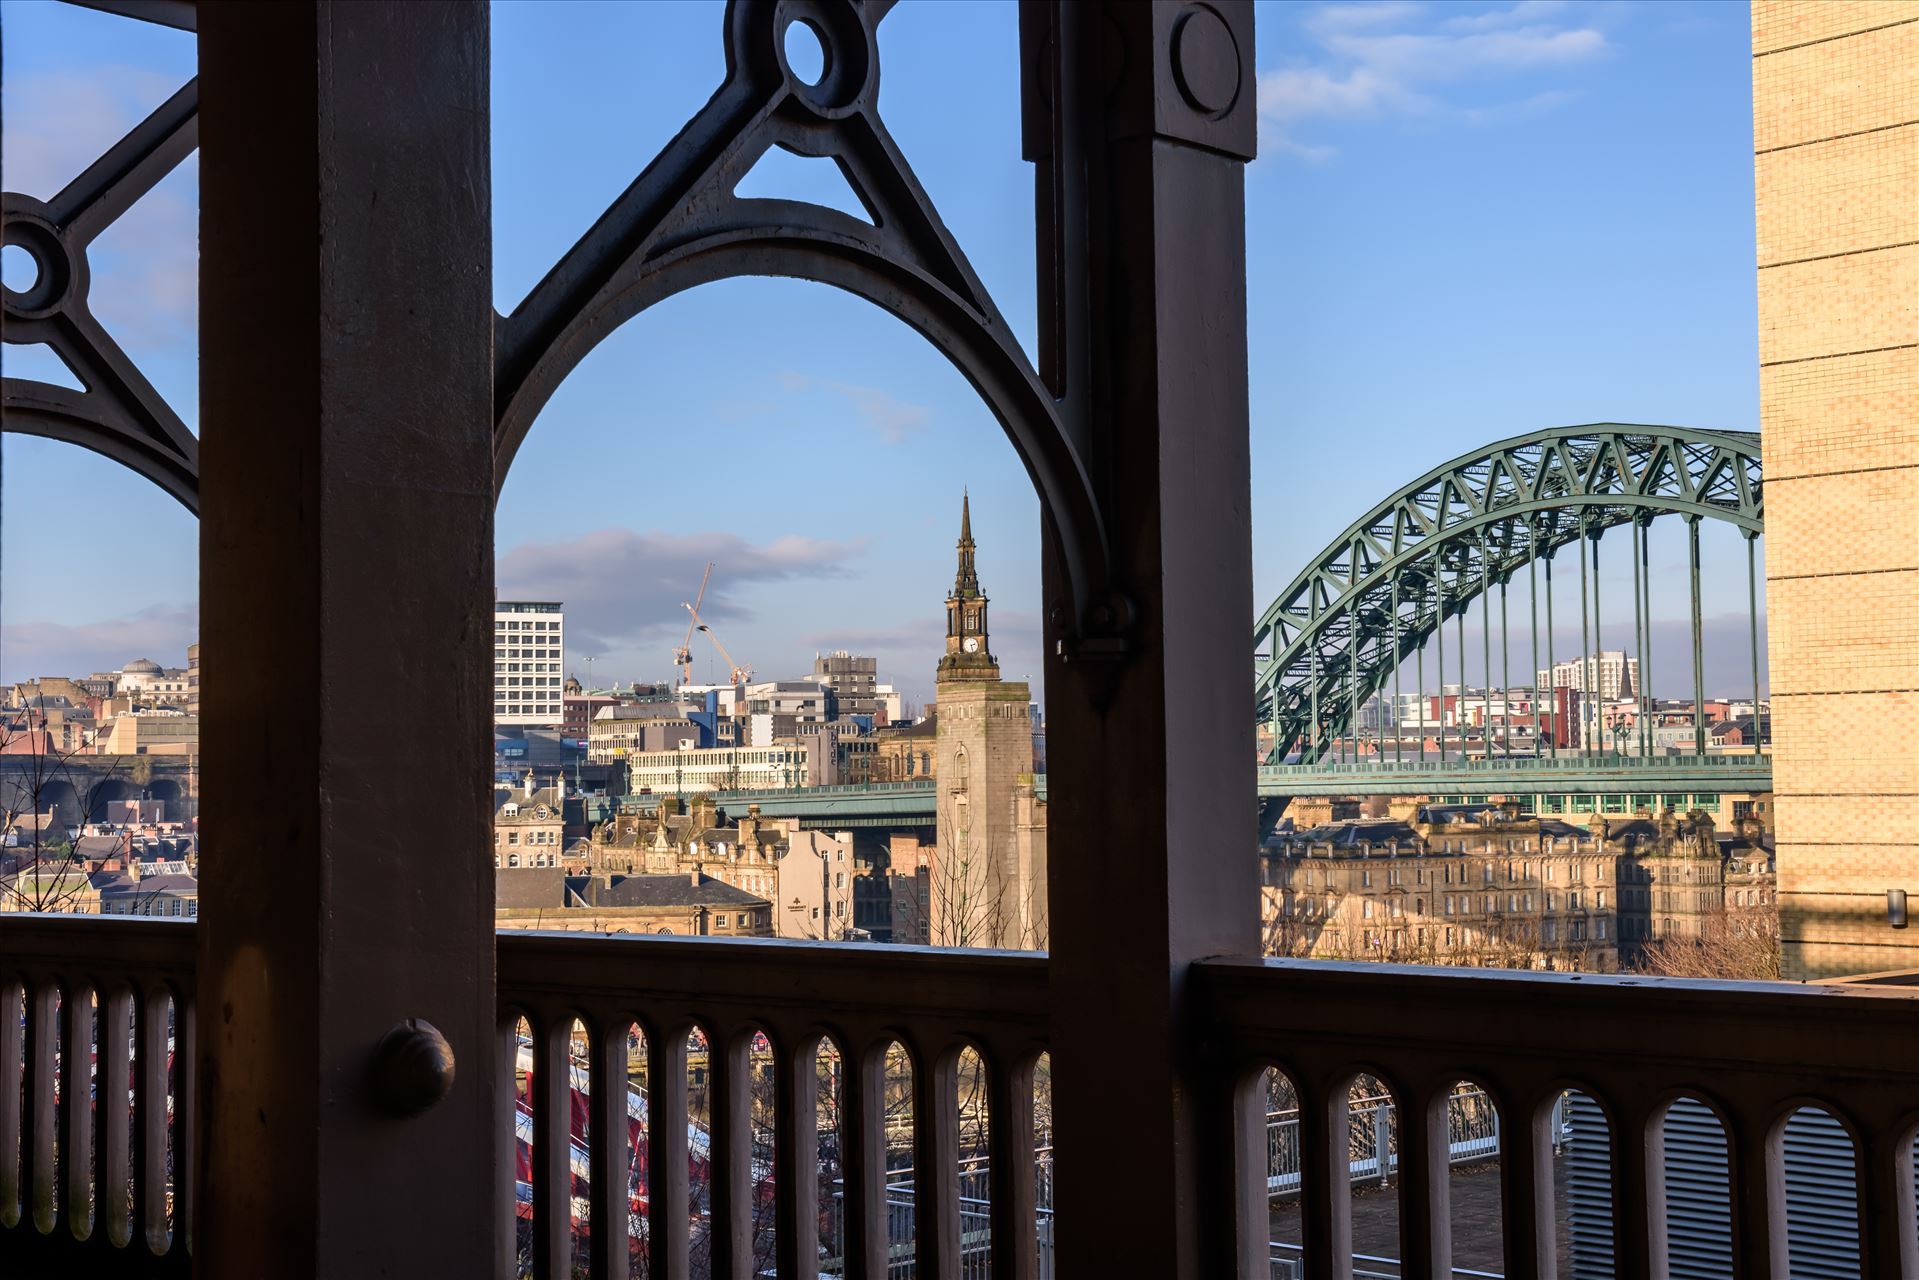 Bridges - Looking across to the Tyne Bridge from the High Level Bridge. by philreay